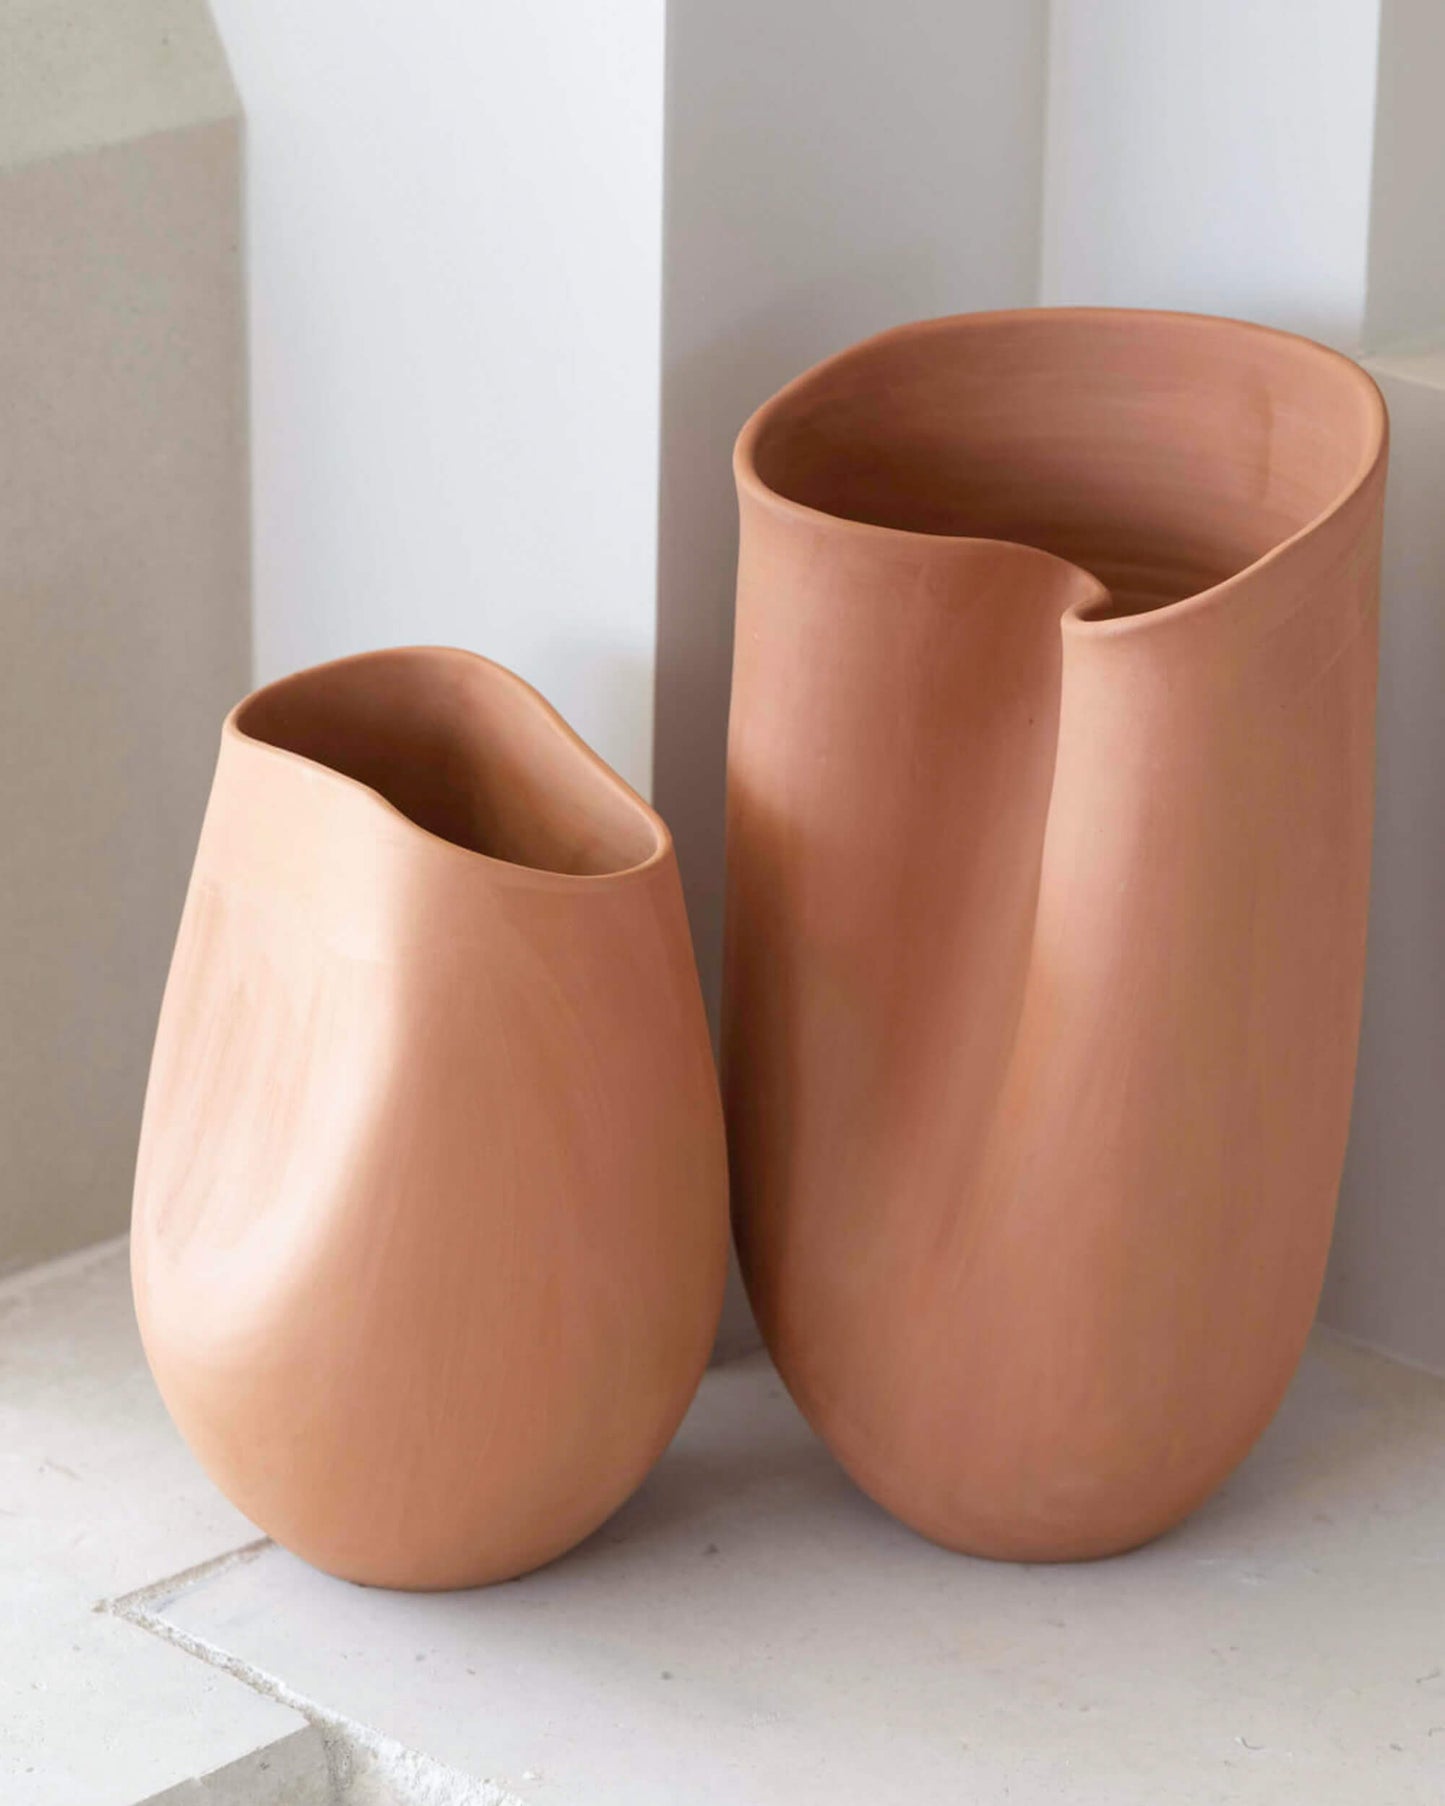 Large and small Tahj Terracotta Vases styled on stone mantle by Fairkind.